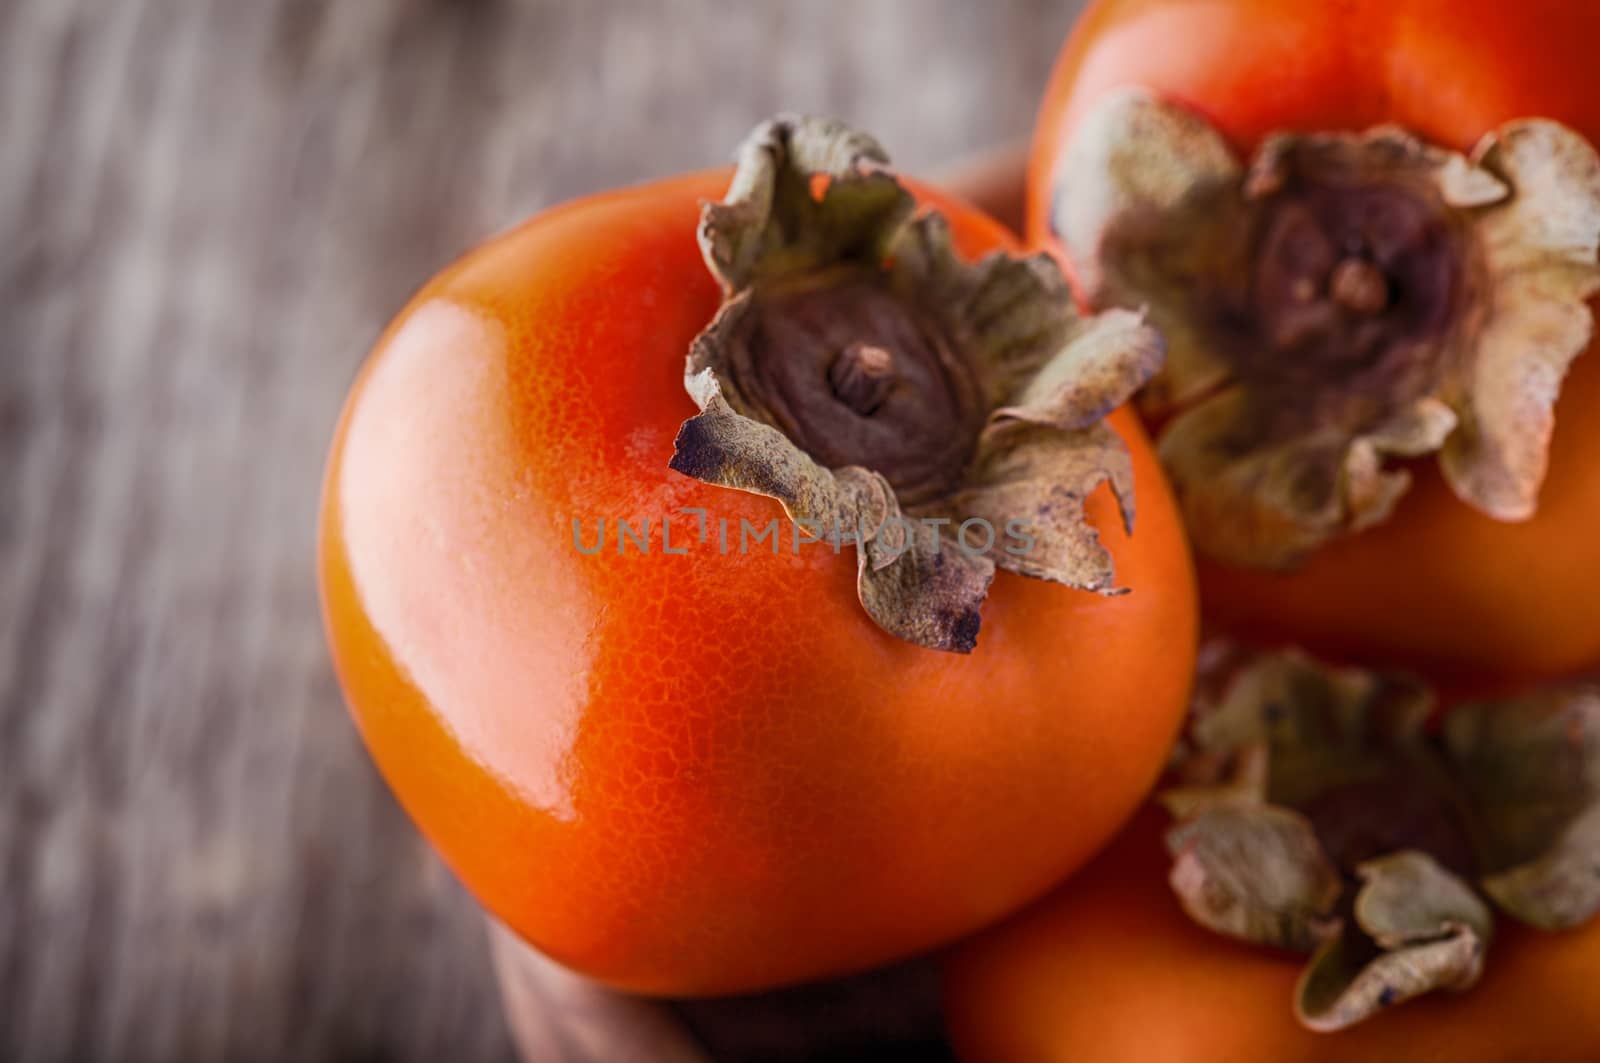 Fresh orange Persimmons on a wooden table.